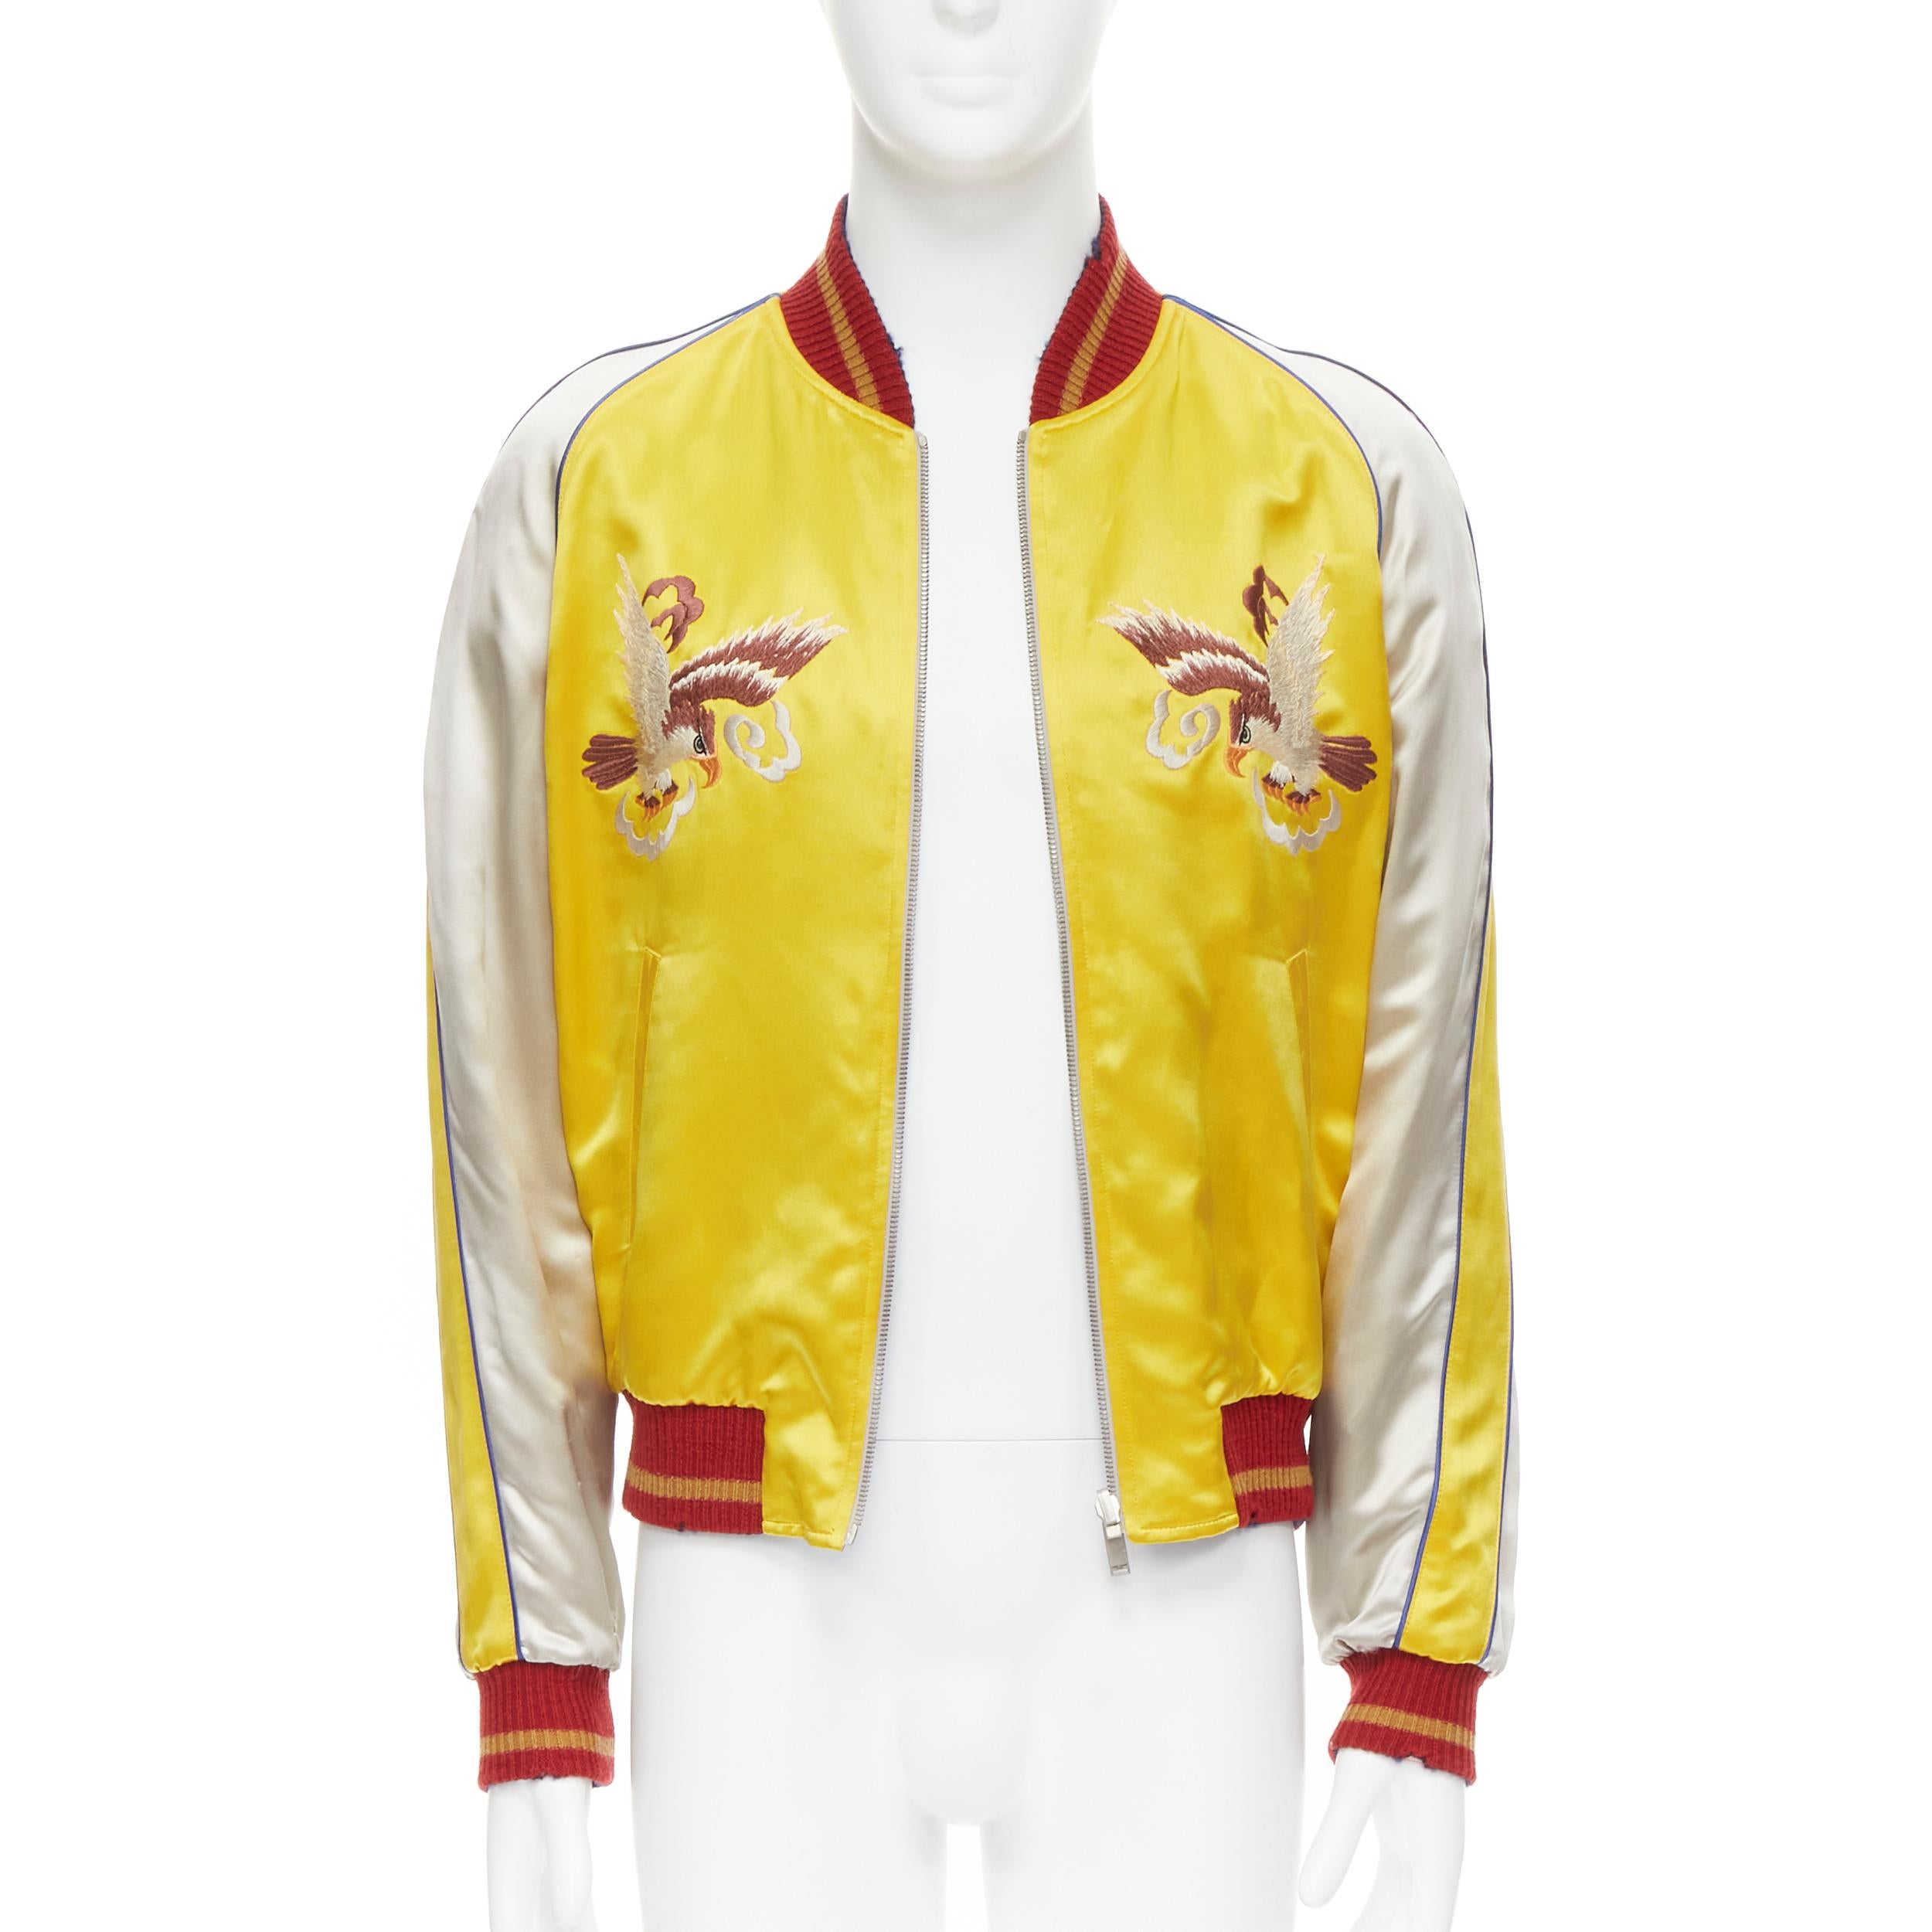 new SAINT LAURENT 2018 Reversible yellow satin bird nude embroidery bomber EU48 
Reference: TGAS/B01702 
Brand: Saint Laurent 
Collection: 2018 Runway 
Material: Viscose 
Color: Yellow 
Pattern: Solid 
Closure: Zip 
Extra Detail: Signature Saint